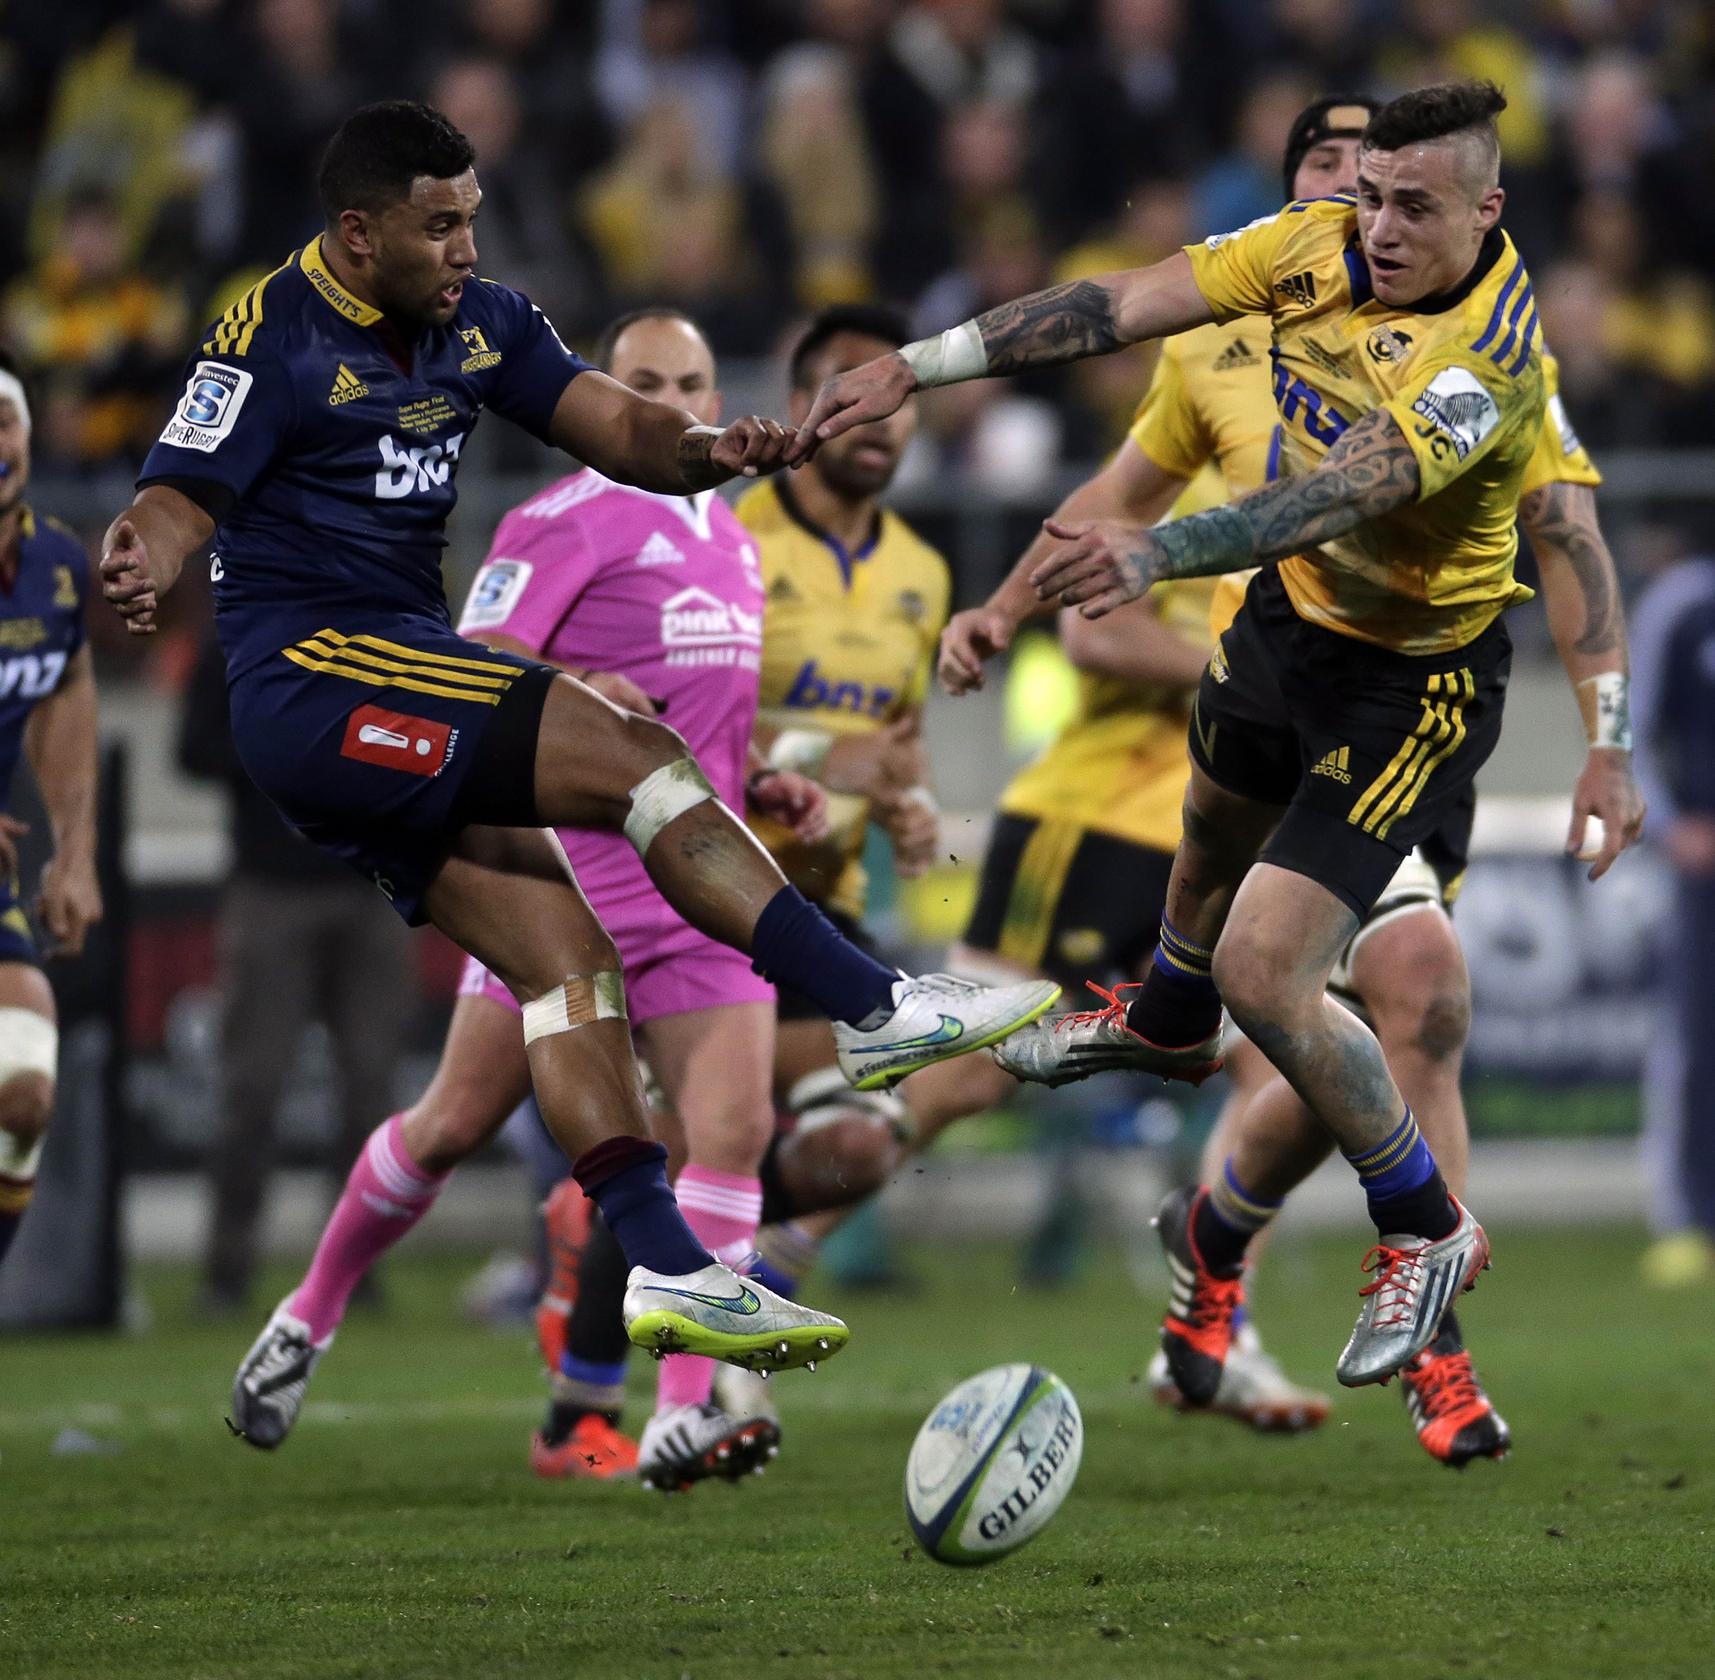 After an excellent Super Rugby season with the Hurricanes, scrum-half TJ Perenara (right) has again caught the eye of All Blacks coach Steve Hansen. Photo: AFP